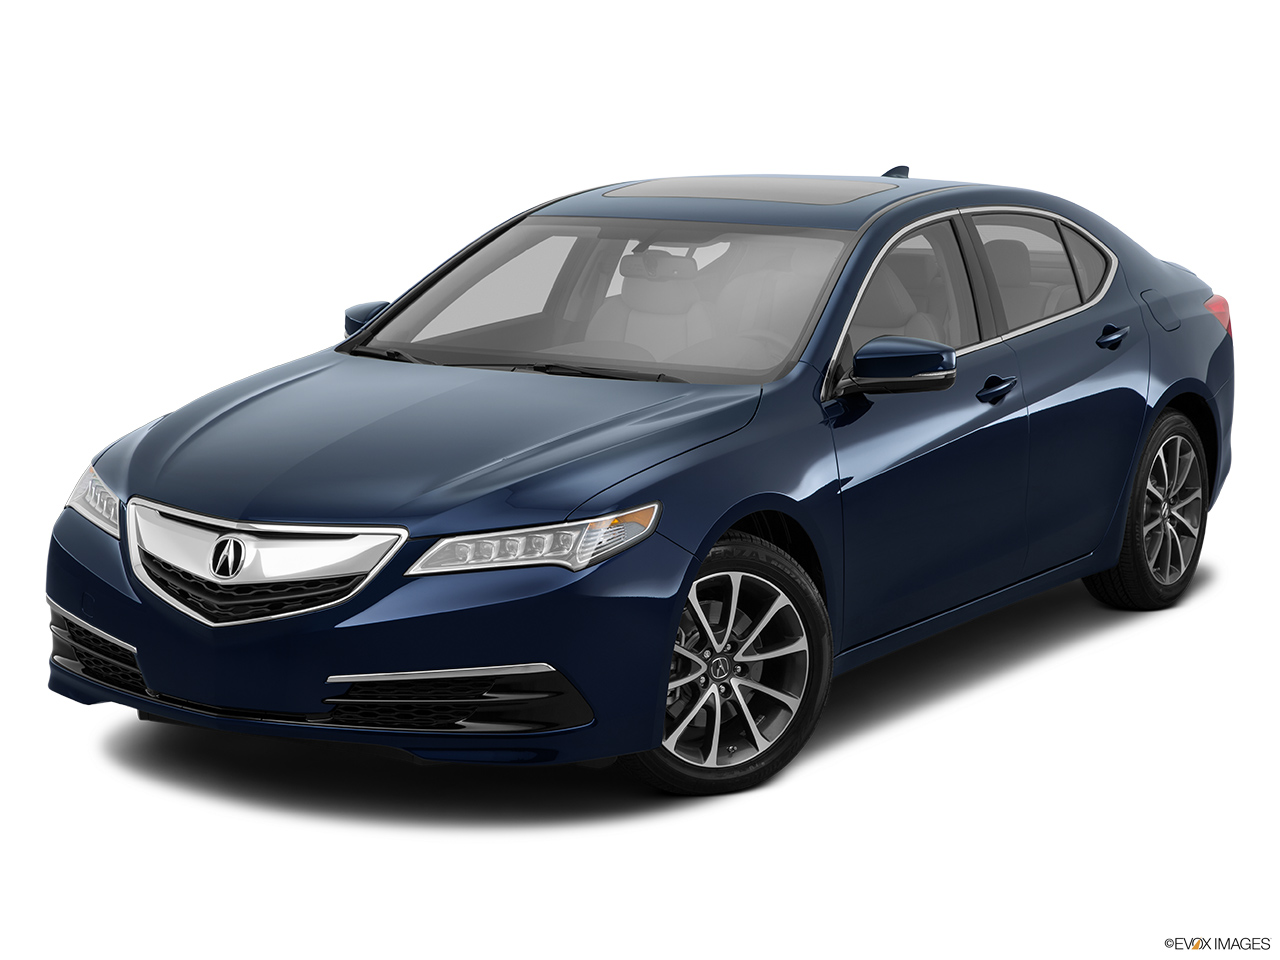 2015 Acura TLX 3.5 V-6 9-AT P-AWS Front angle view. 